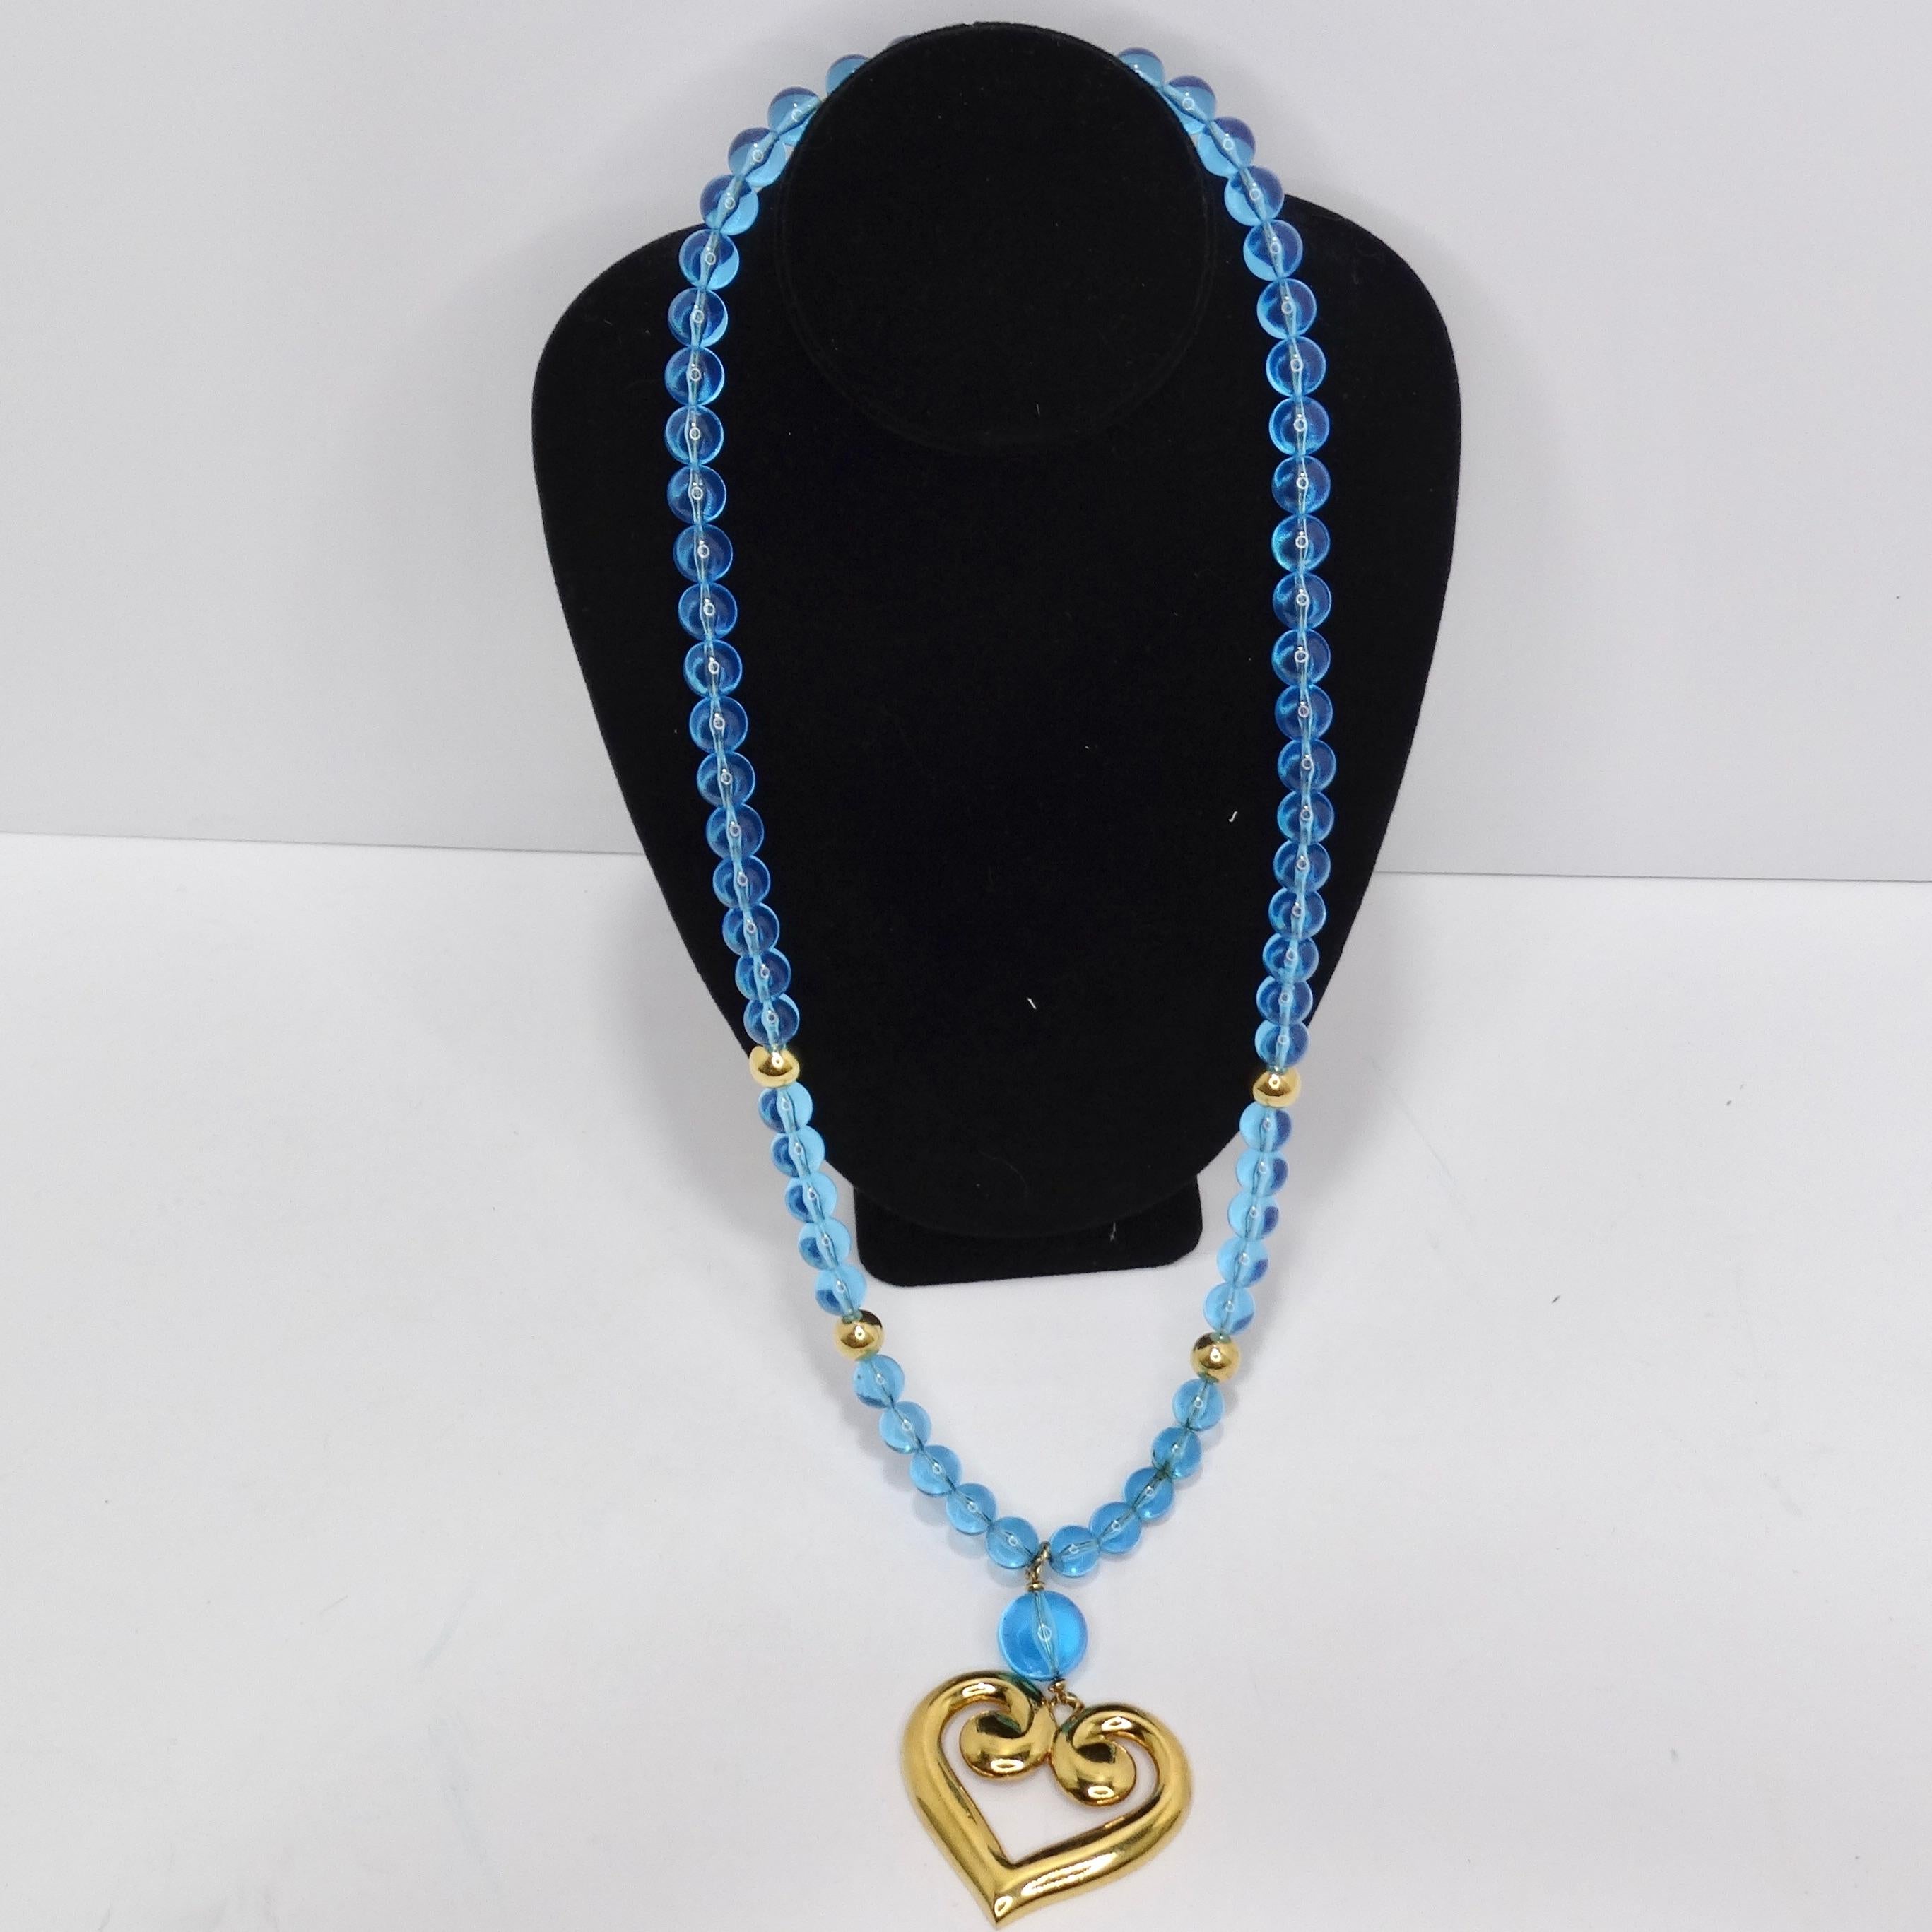 Embrace the vibrant allure of the 1980s with our captivating Napier 18K Gold Plated Greek Heart Blue Bead Pendant Necklace. This dramatic and long necklace features a multitude of electric blue beads that gracefully contrast with the lustrous 18K